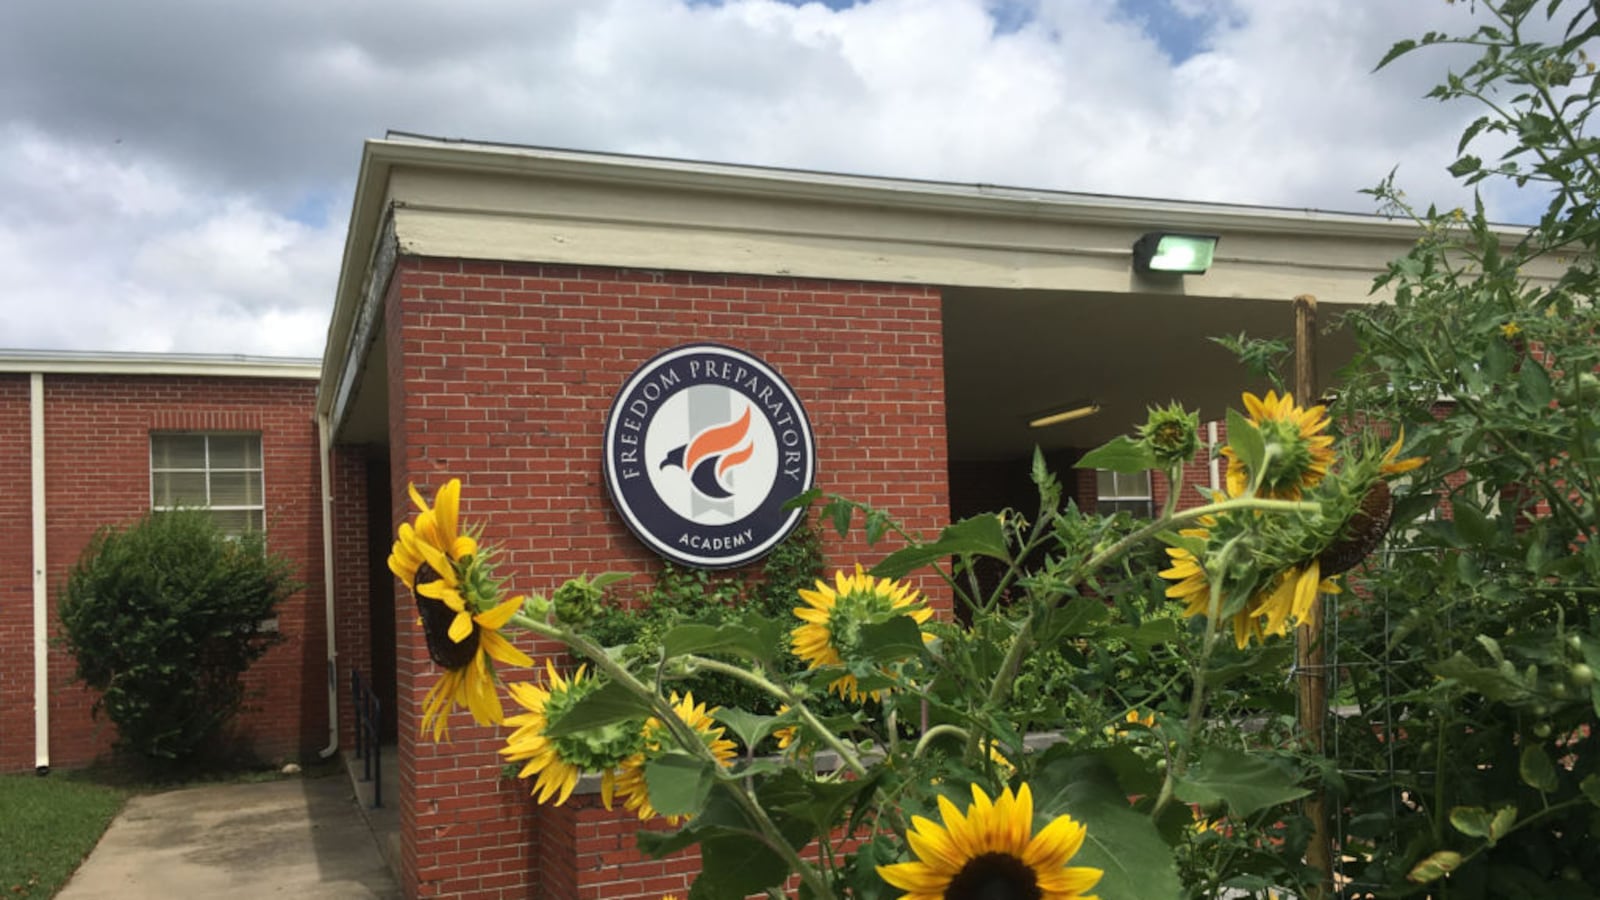 Freedom Preparatory Academy. Shelby County Schools board had already approved the Freedom Preparatory Academy network to open its sixth school in Memphis. The academy won approval Tuesday night to change its location from Sherwood Forest to the Westwood neighborhood.